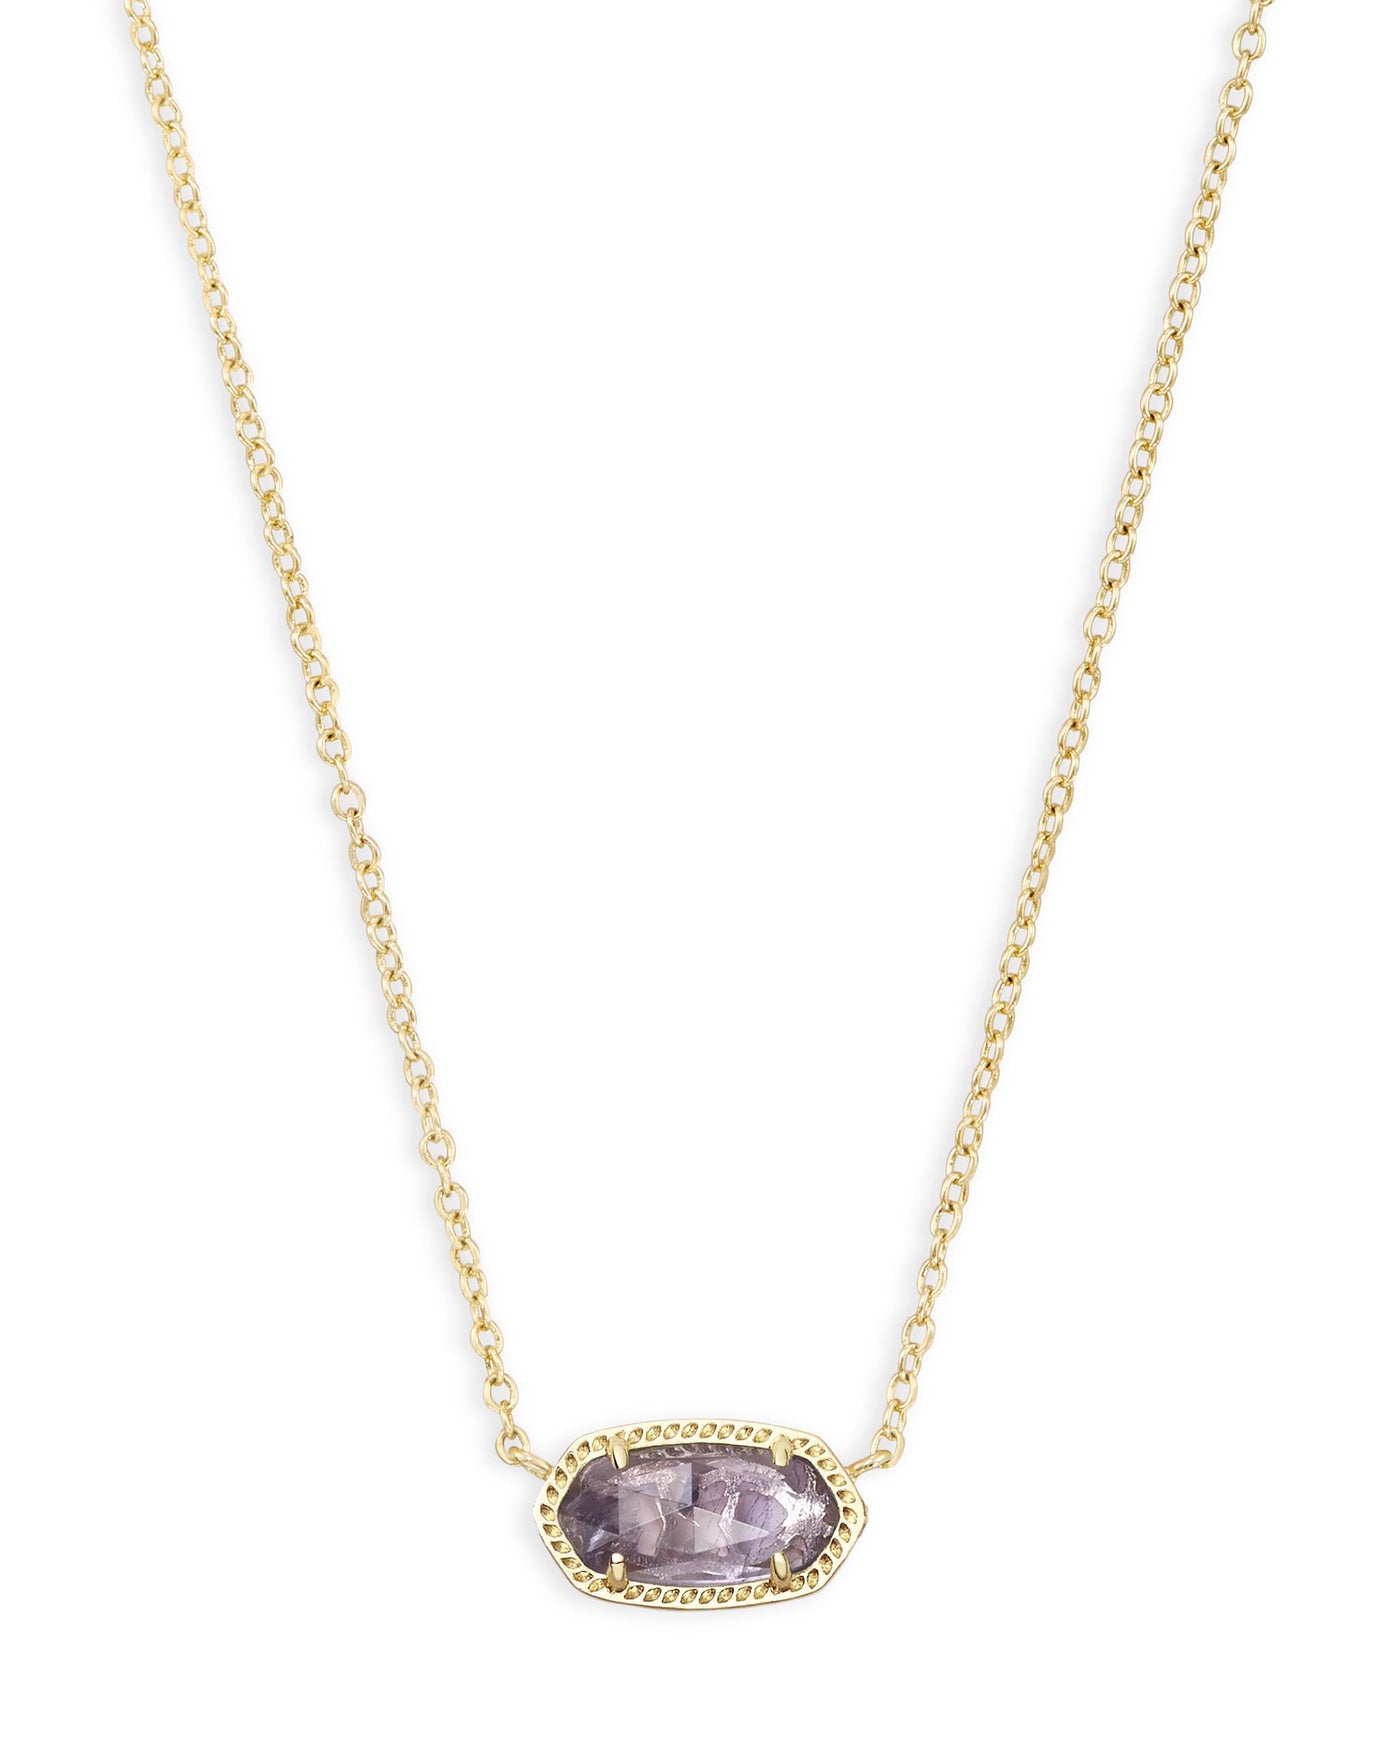 Gold Tone Necklace Featuring Purple Amethyst by Kendra Scott